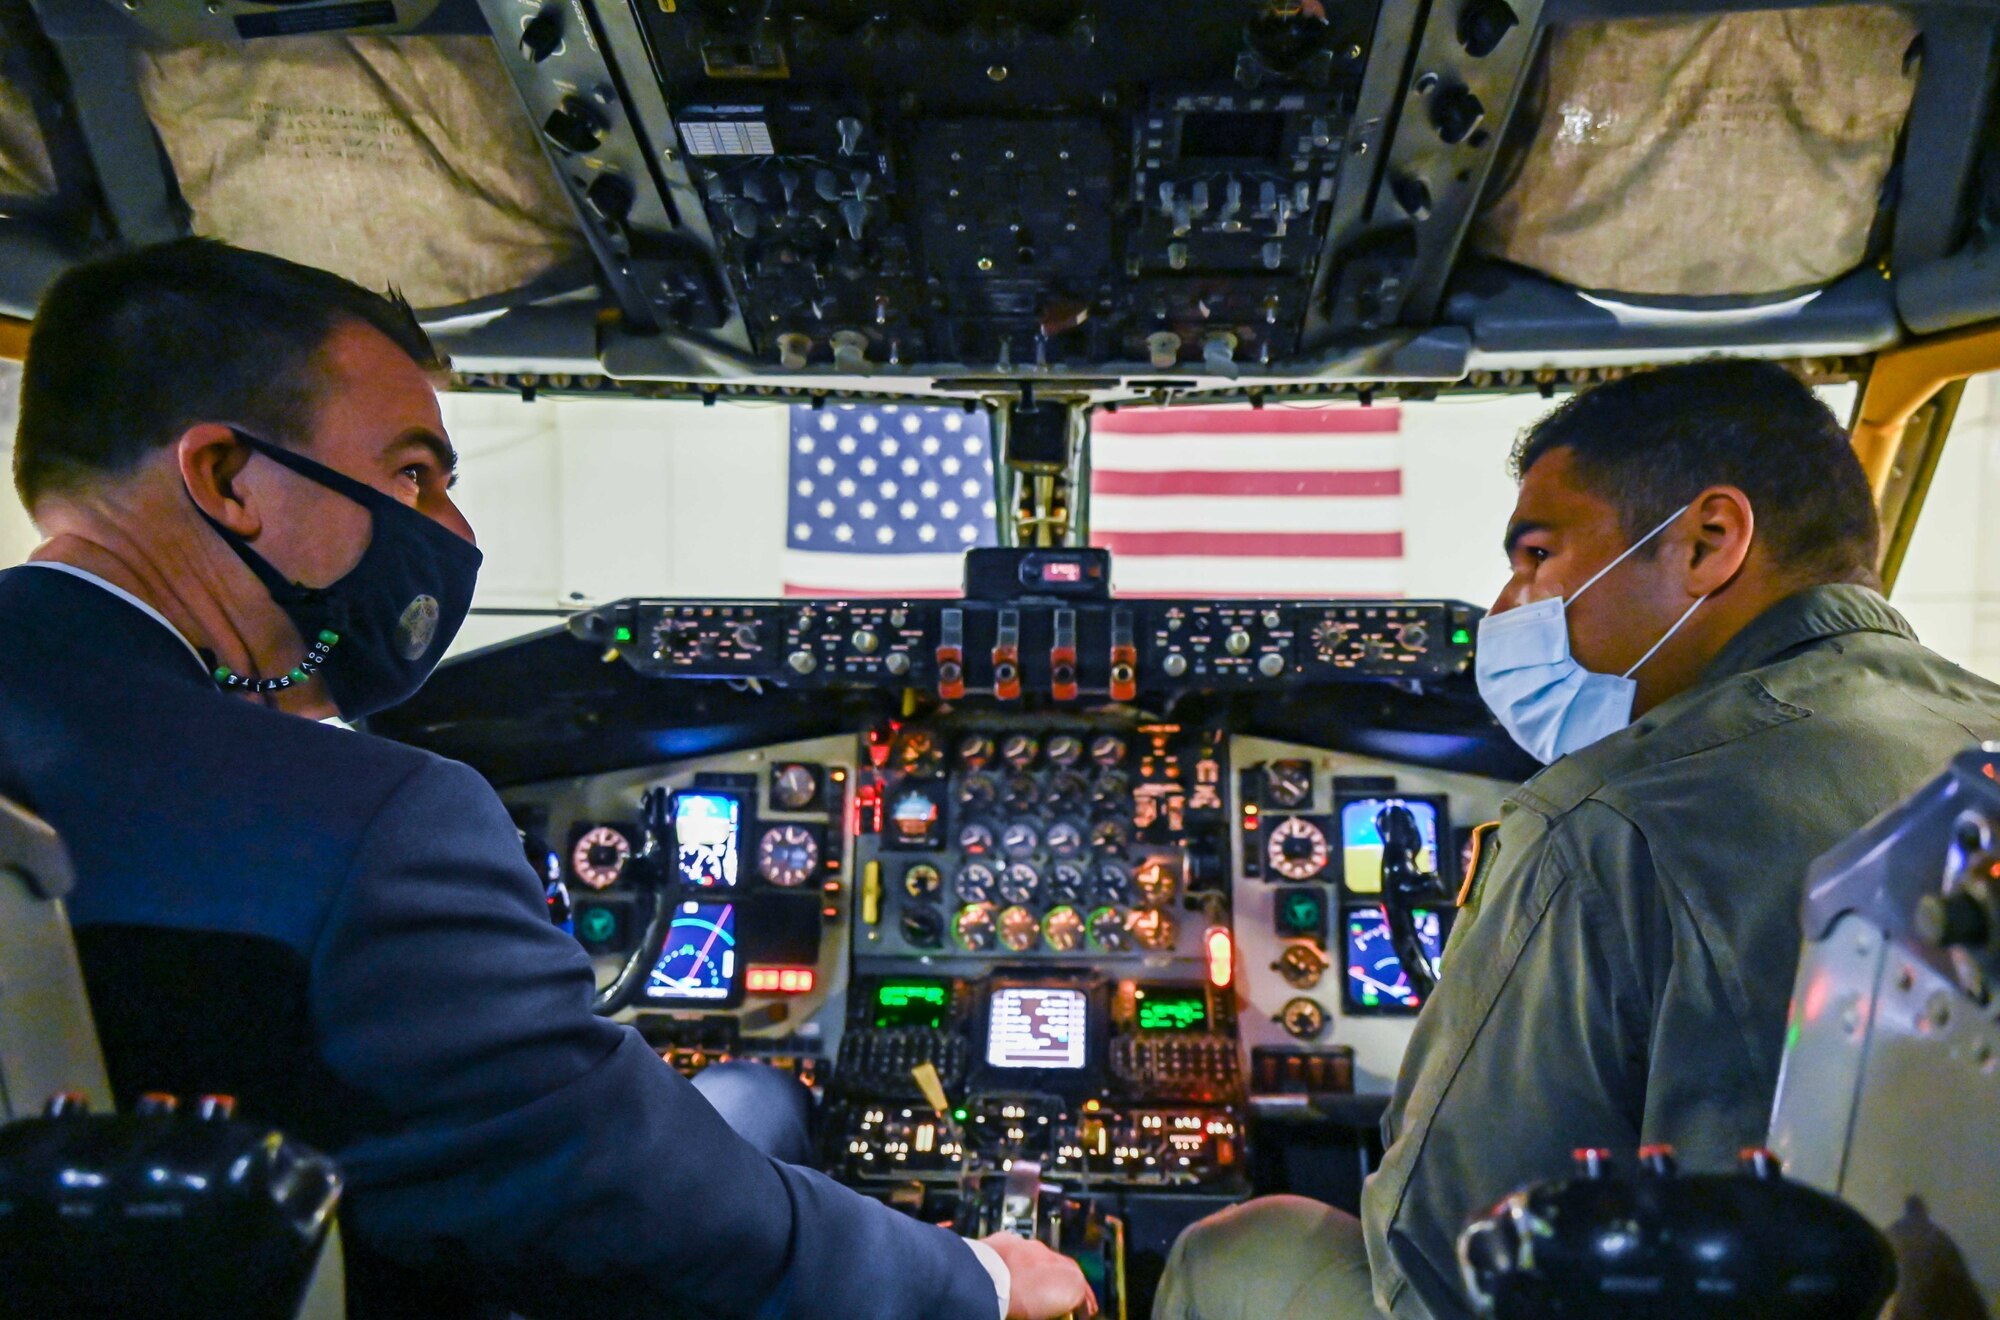 1st Lt. Aaron Price, 465th Air Refueling Squadron pilot, shows the Honorable J. Kevin Stitt, Governor of Oklahoma, the inside of the KC-135R Stratotanker during a visit to the 507th Air Refueling Wing, Feb. 5, 2021, at Tinker Air Force Base, Oklahoma. (U.S. Air Force photo by Senior Airman Mary Begy)